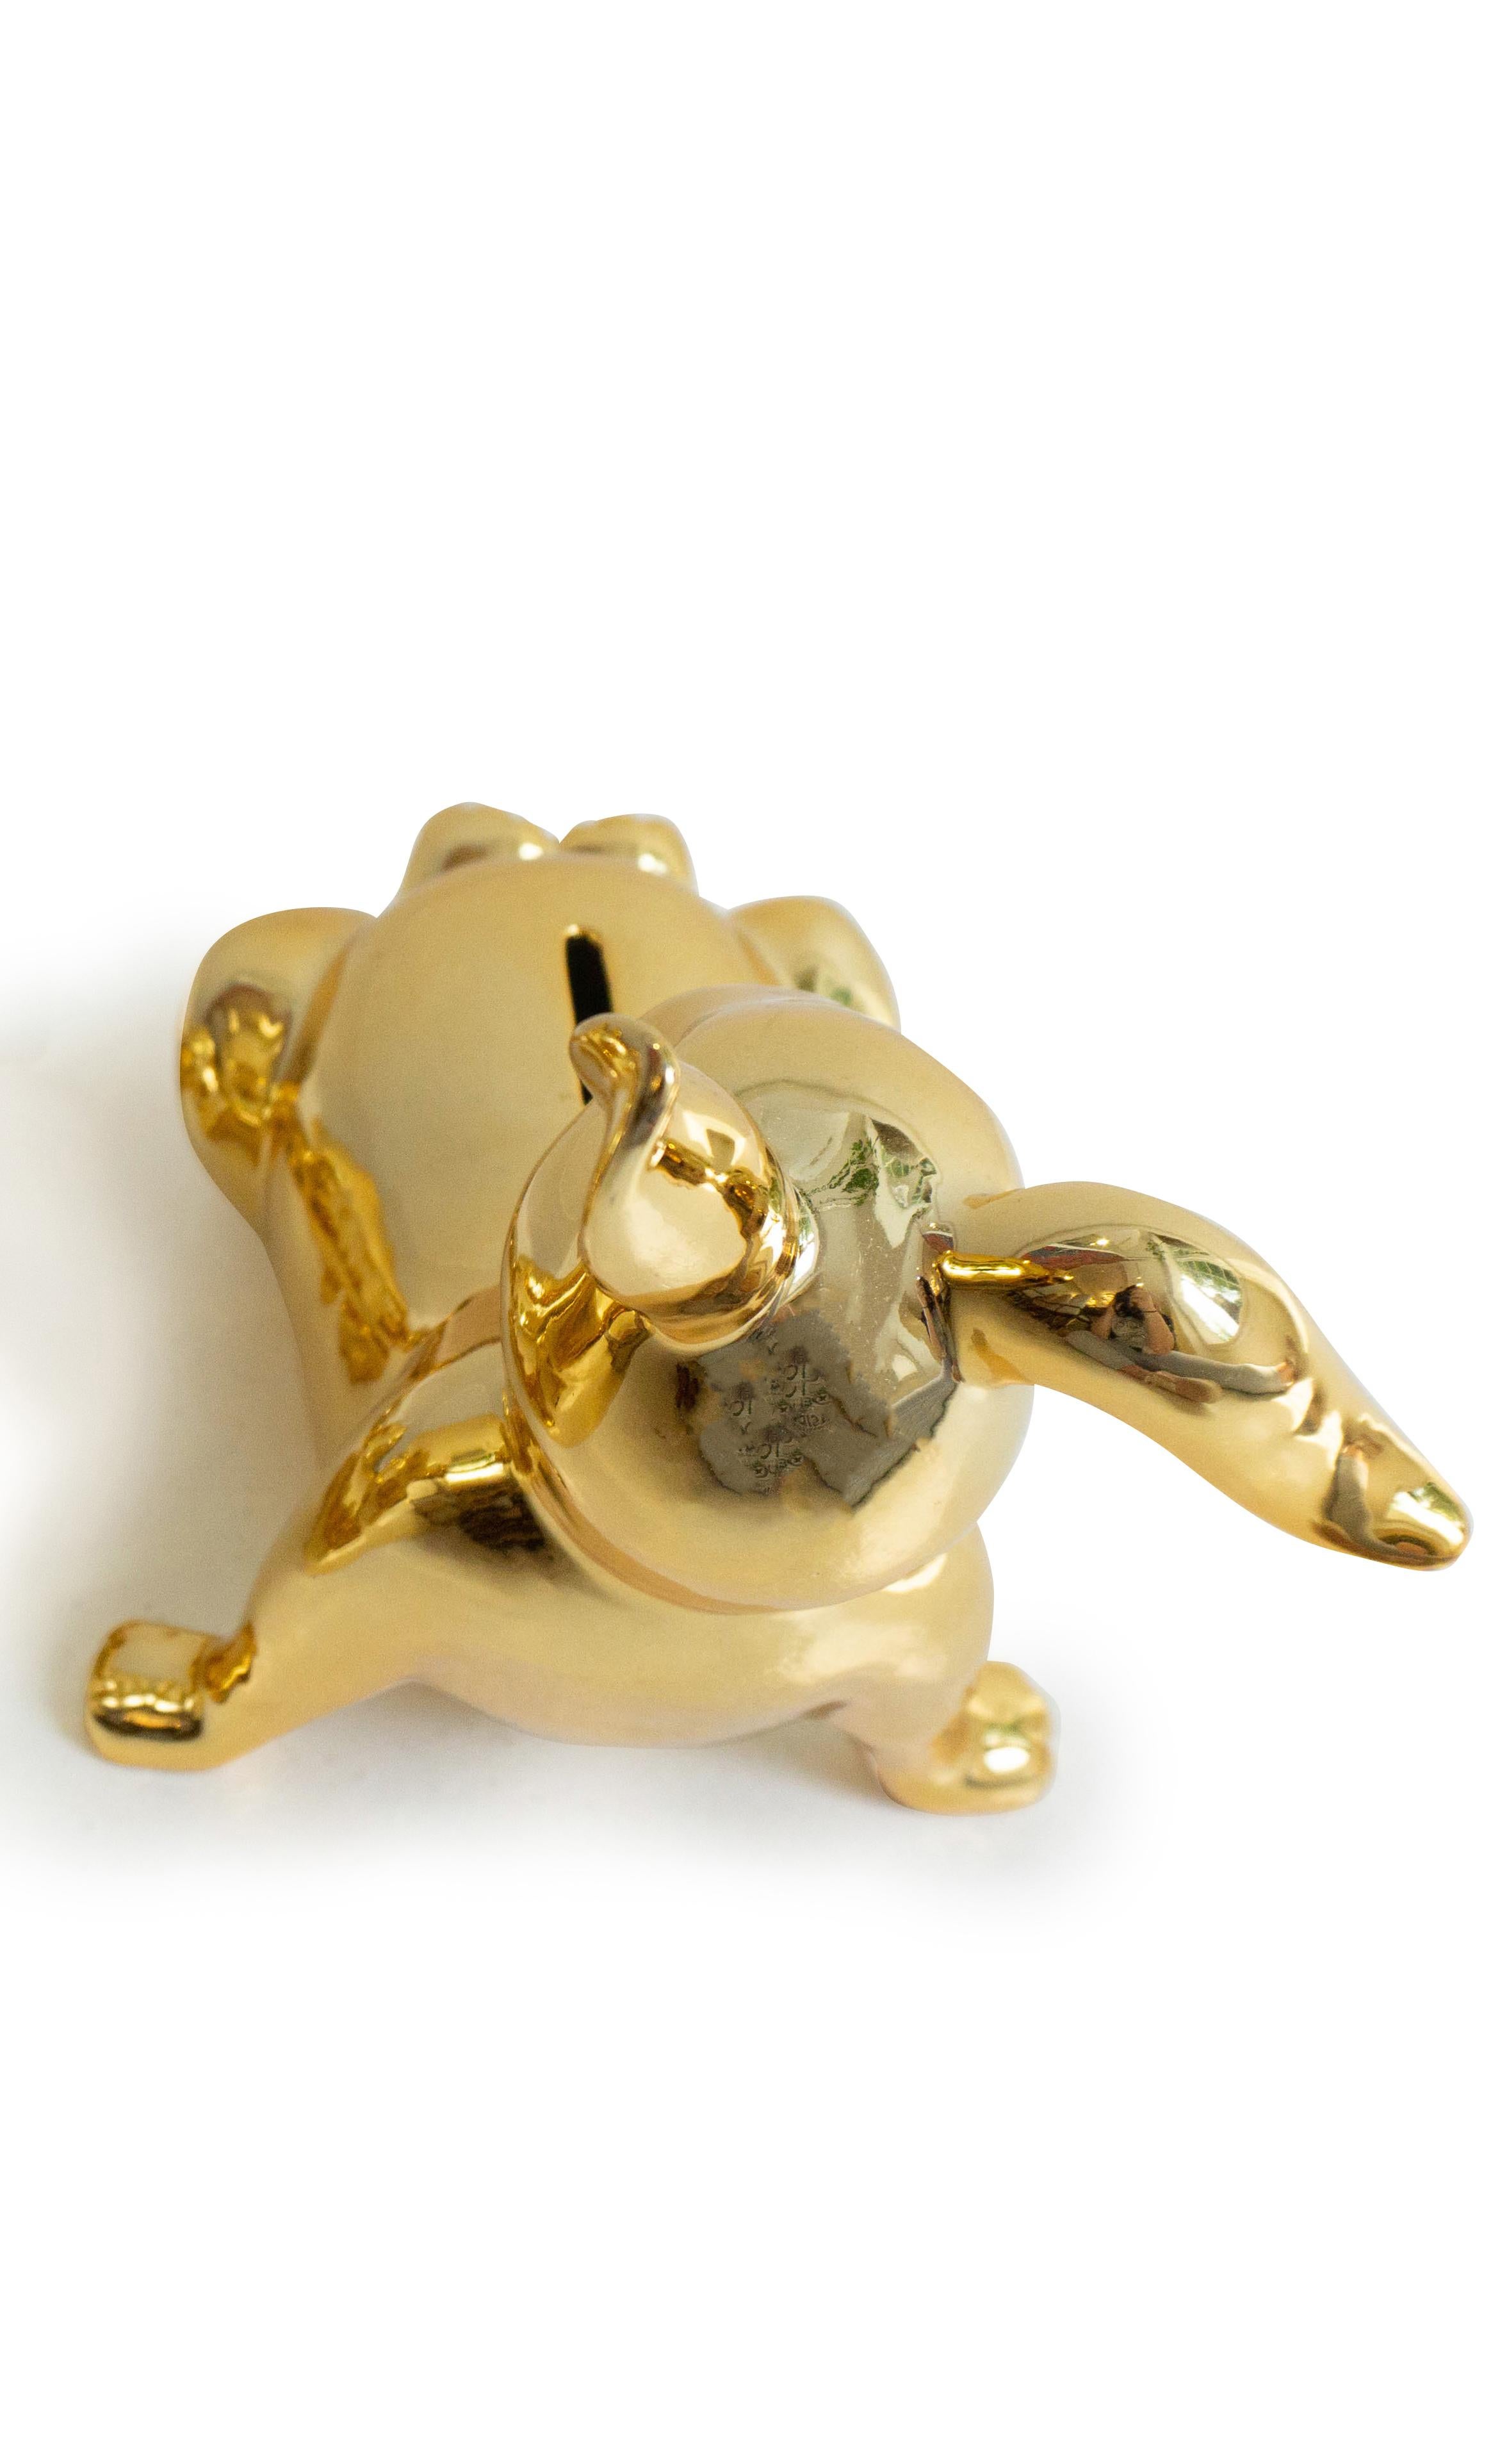 Porcelain gold money bank in the shape of a bunny. 

Dimensions: 7” H x 6” W x 8” L.